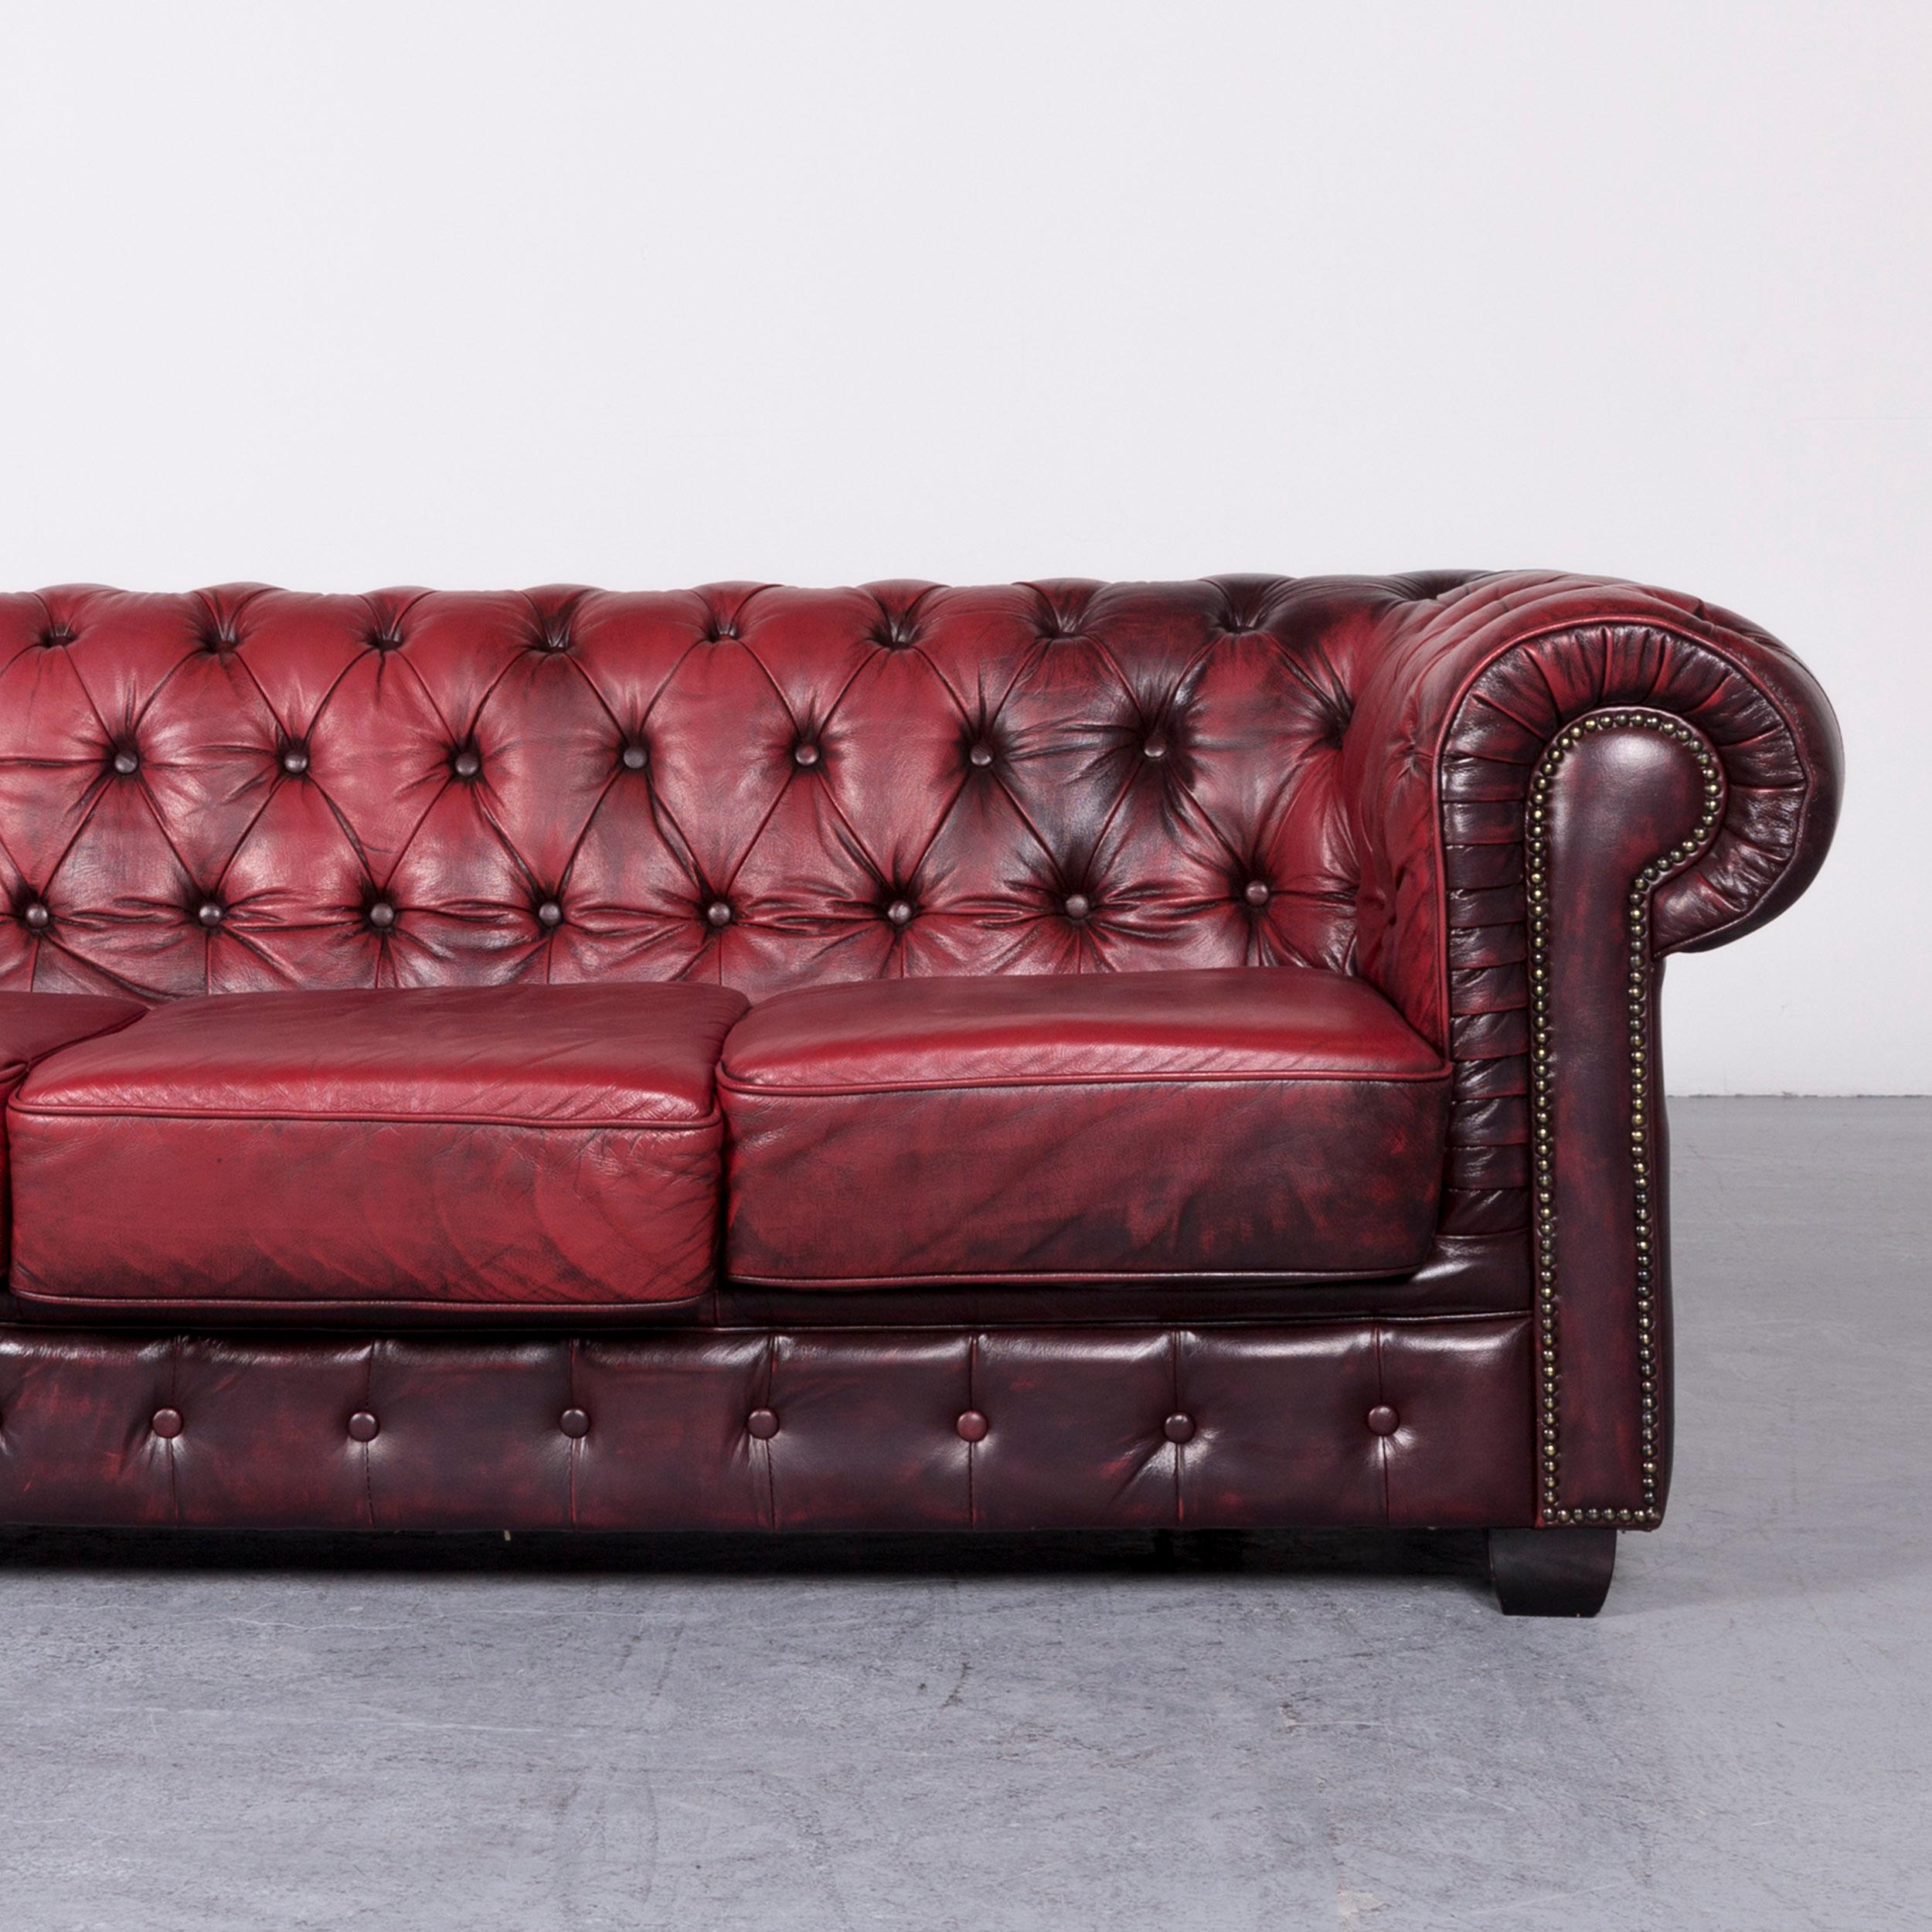 British Chesterfield Leather Sofa Red Three-Seat Vintage Couch